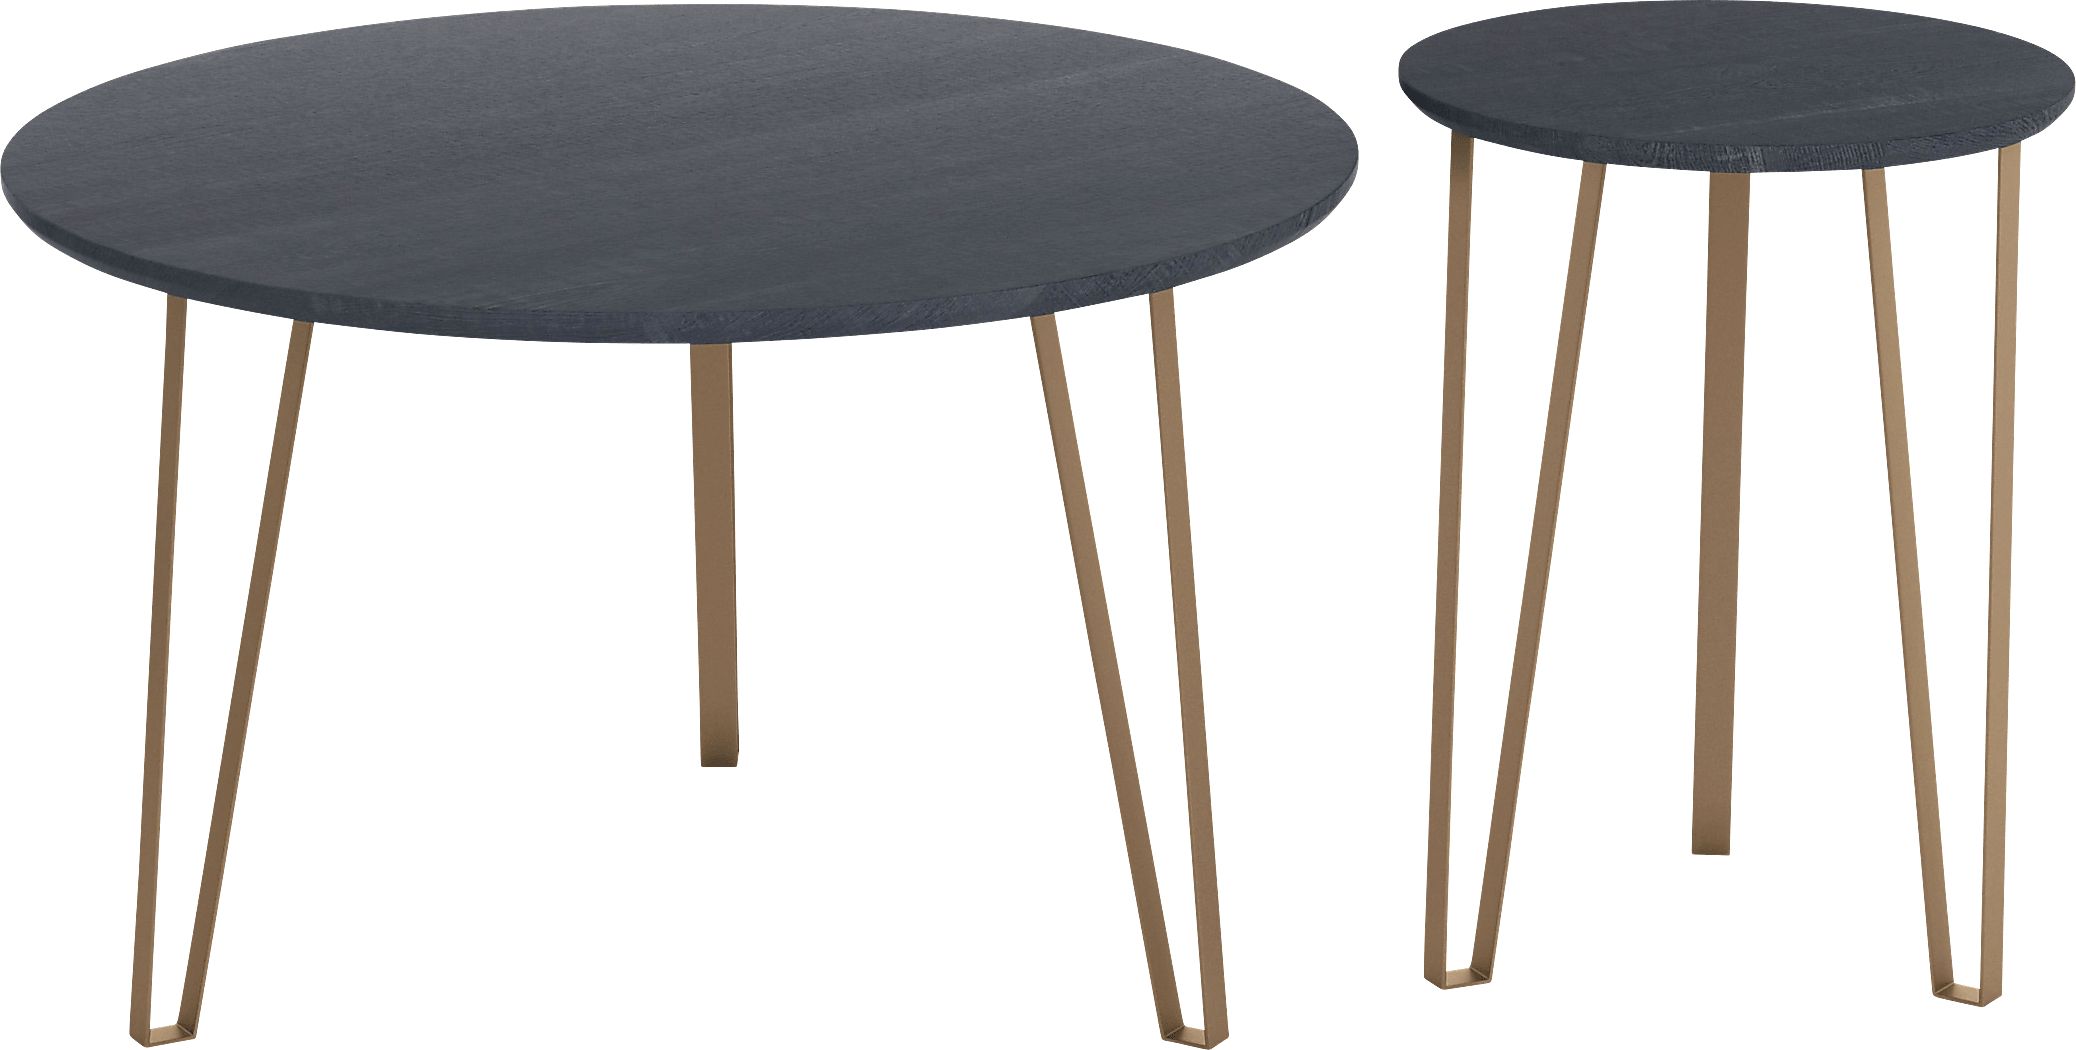 Vailmount Black Accent Table, Set of 2